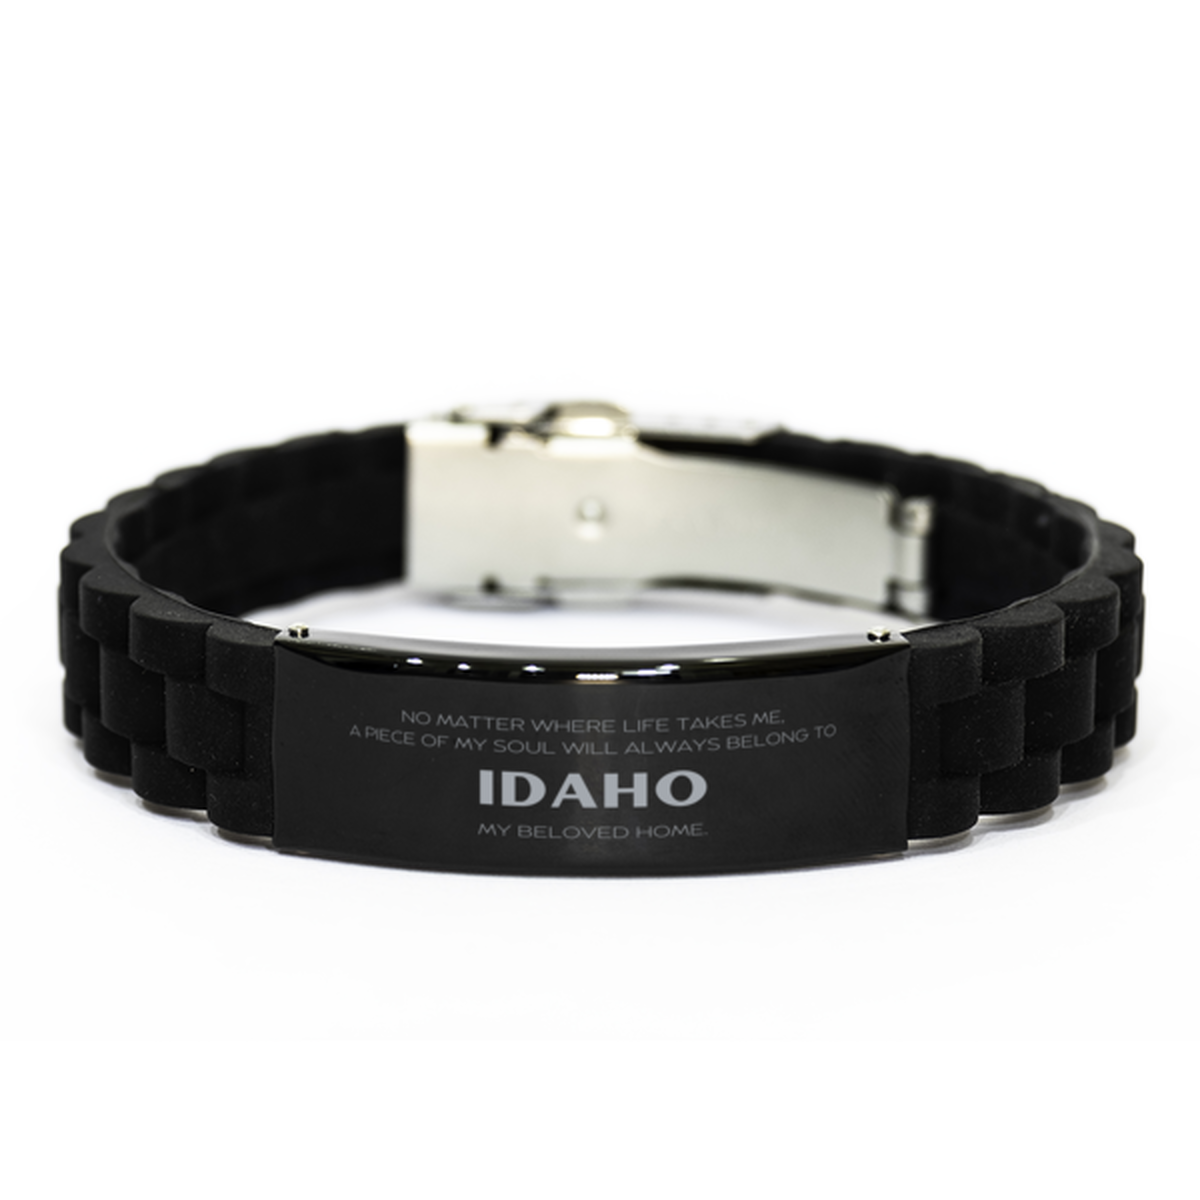 Love Idaho State Gifts, My soul will always belong to Idaho, Proud Black Glidelock Clasp Bracelet, Birthday Unique Gifts For Idaho Men, Women, Friends